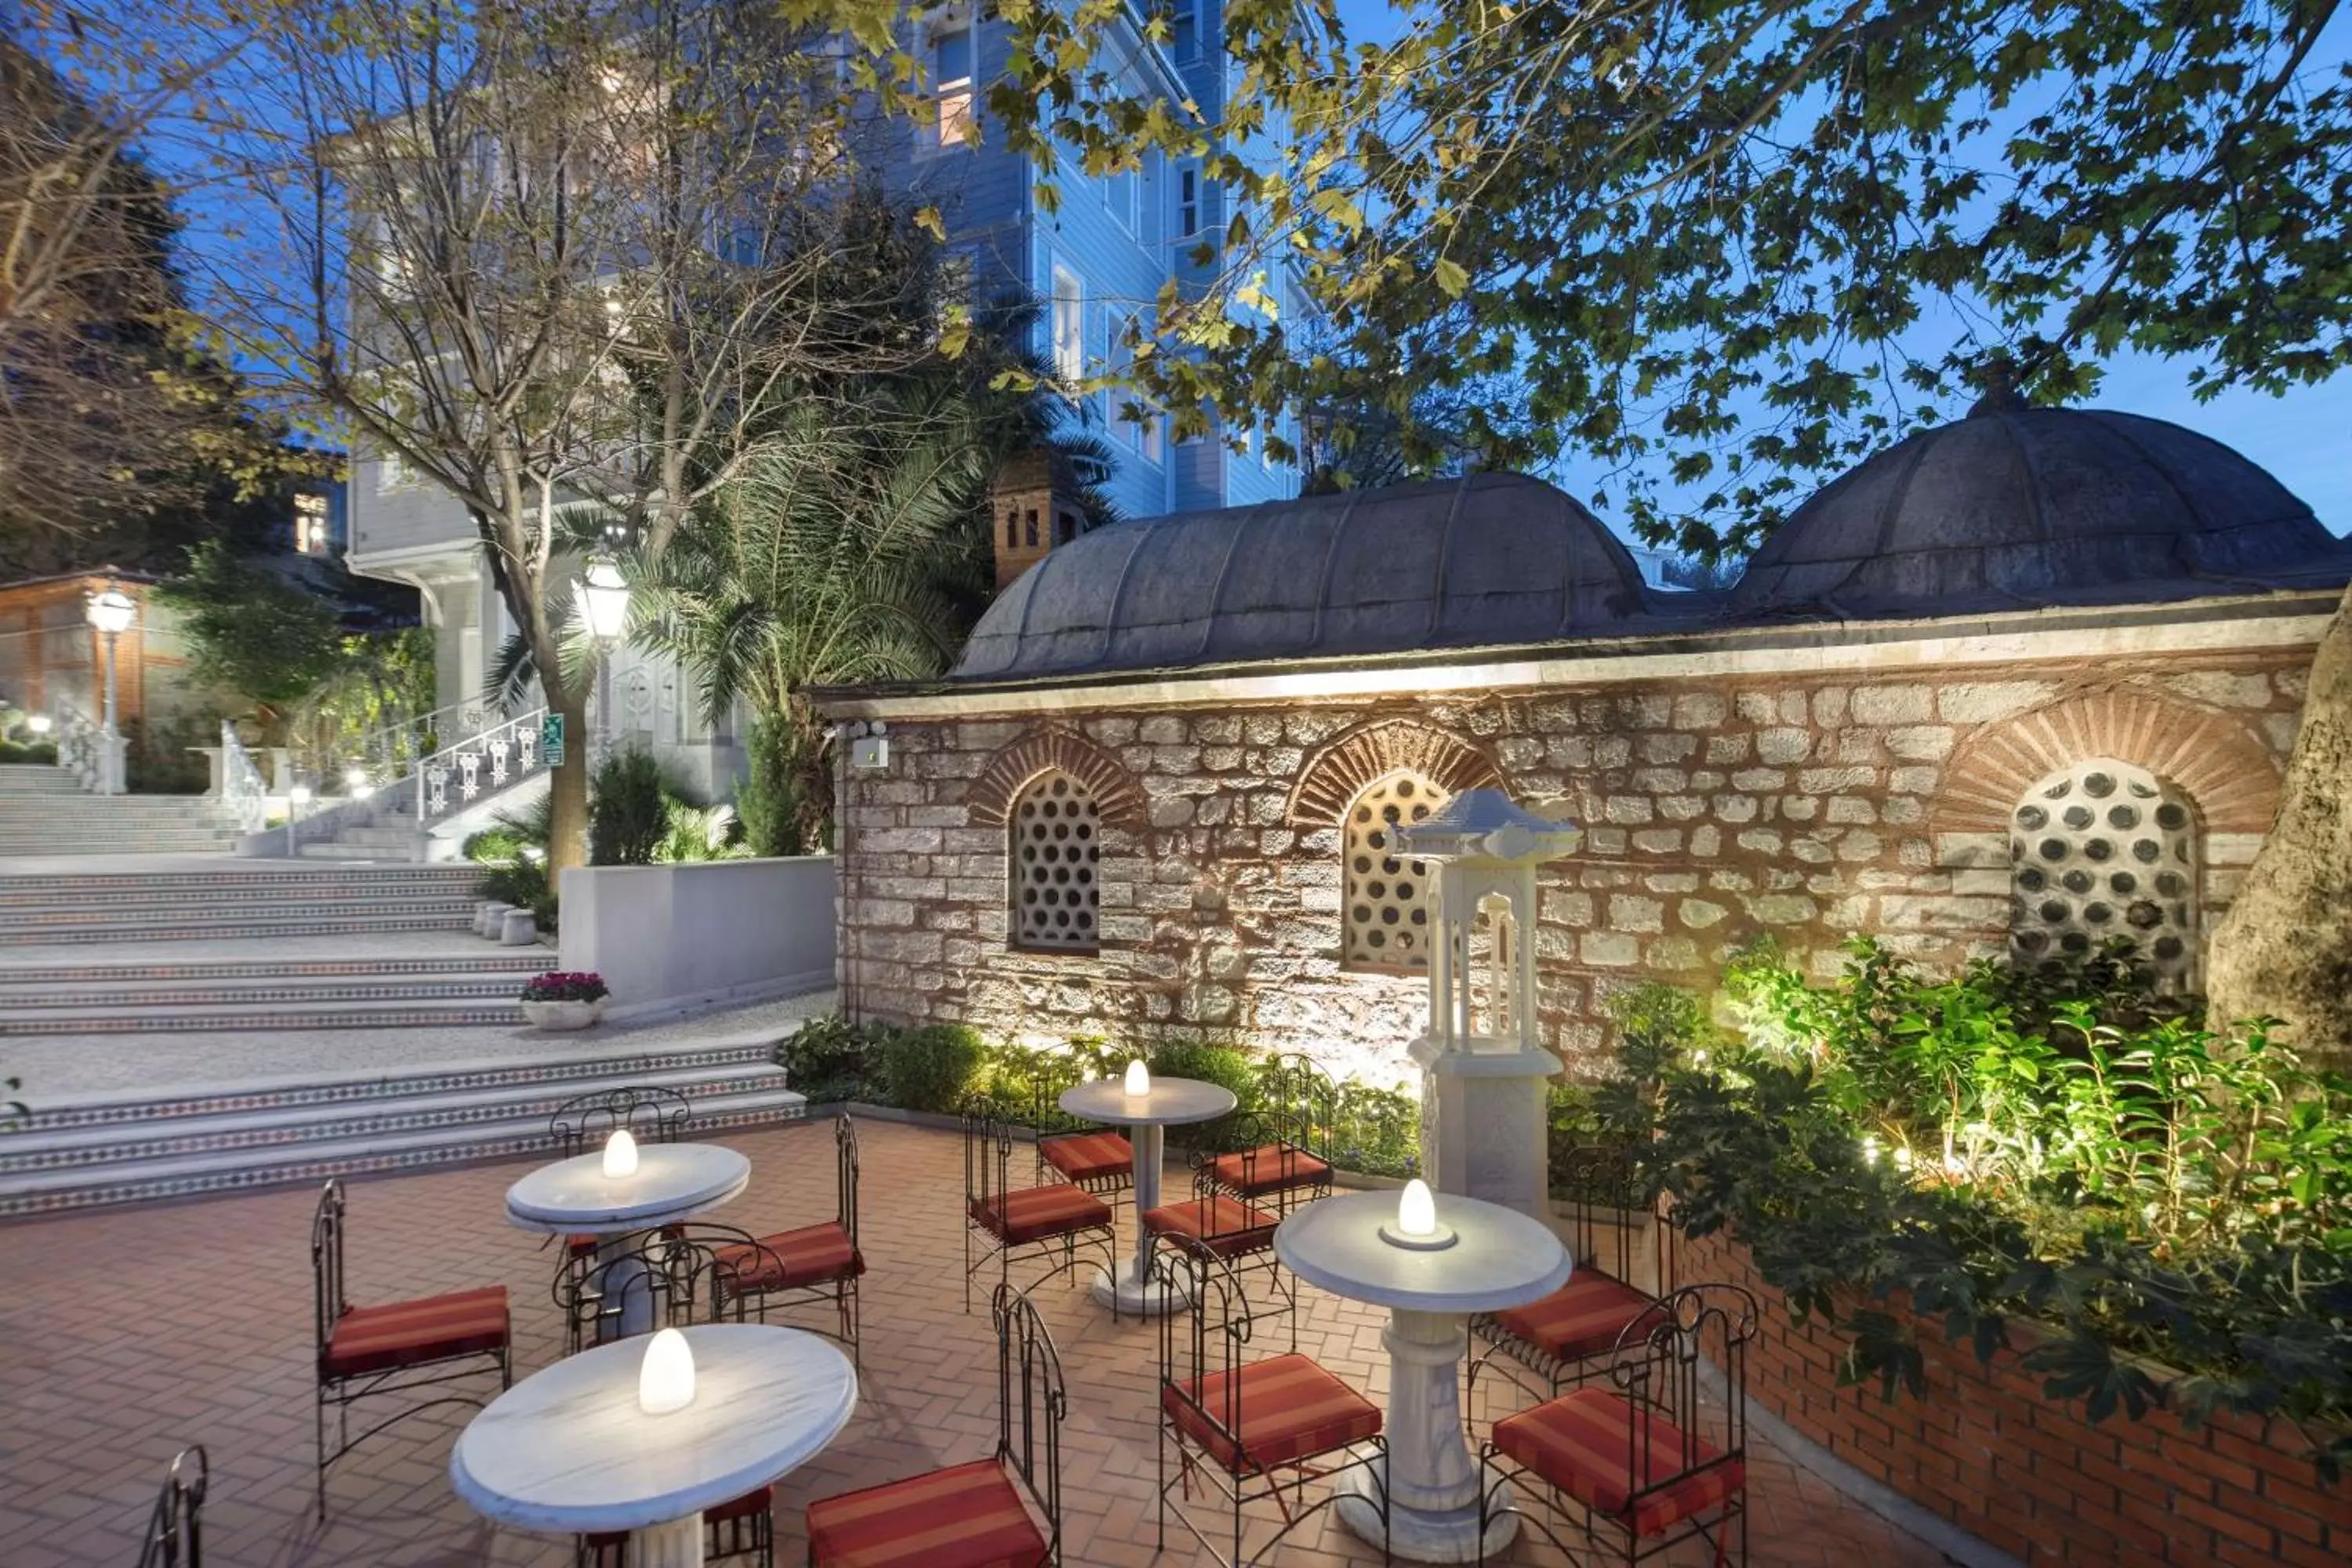 Property building in Hagia Sofia Mansions Istanbul, Curio Collection by Hilton